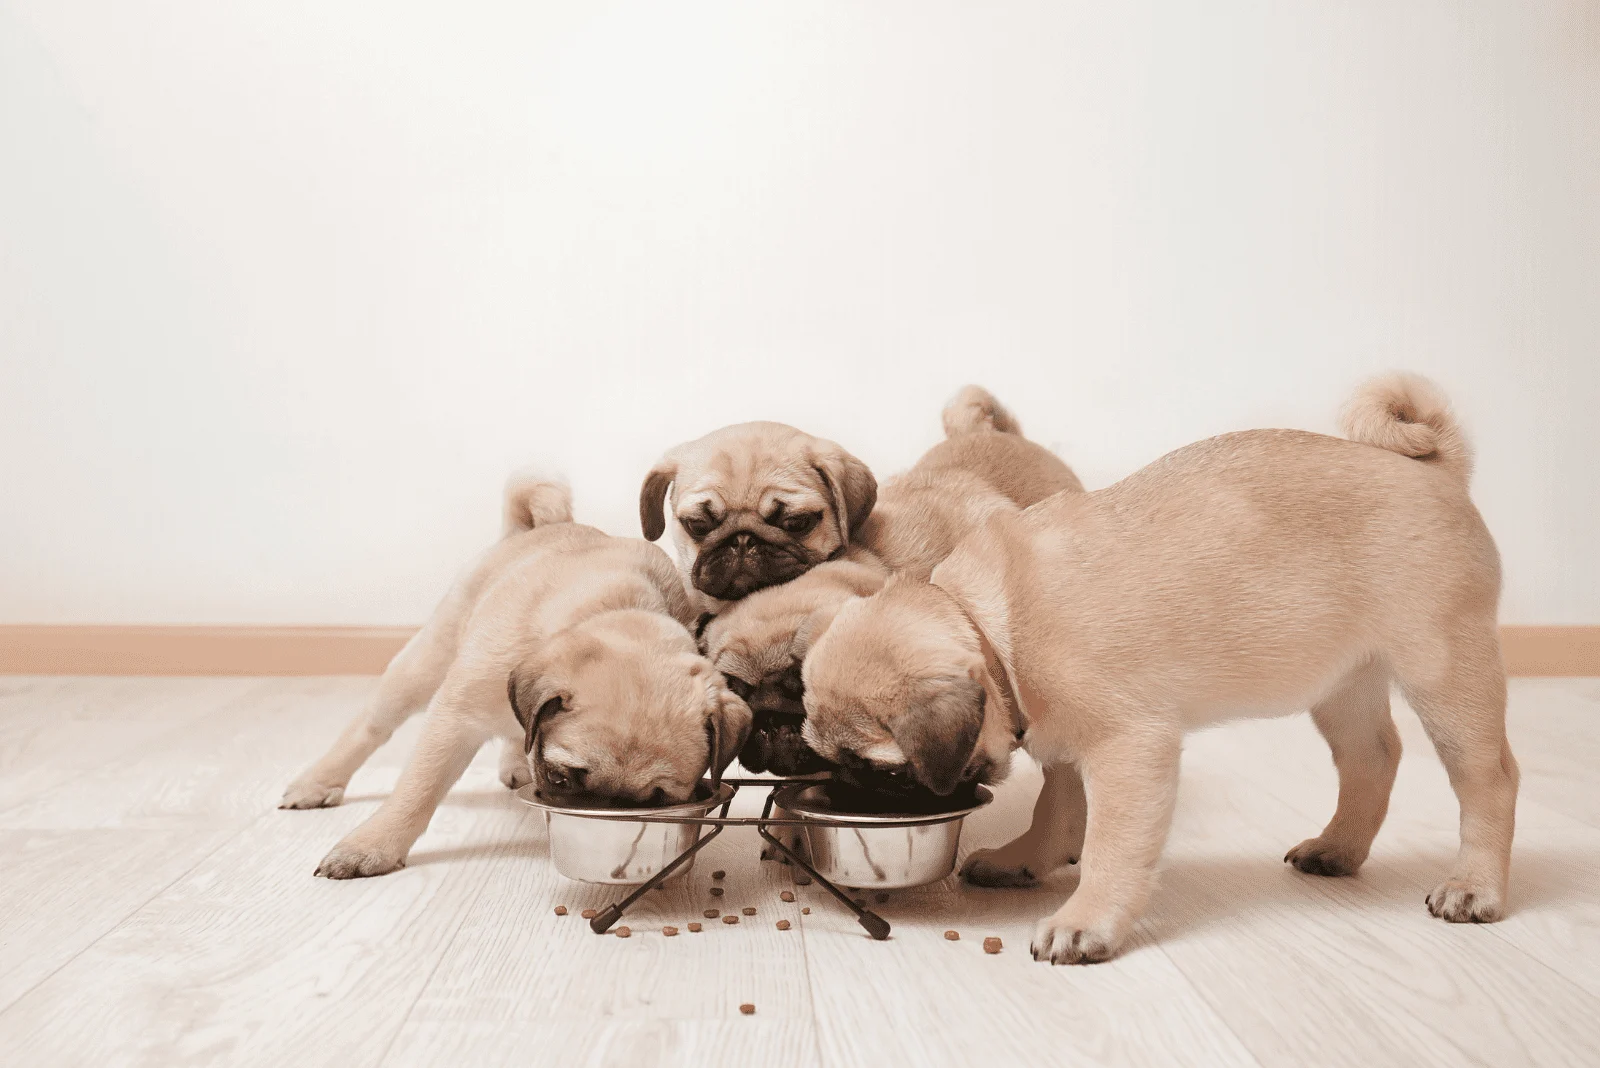 pug puppies eat food from bowls